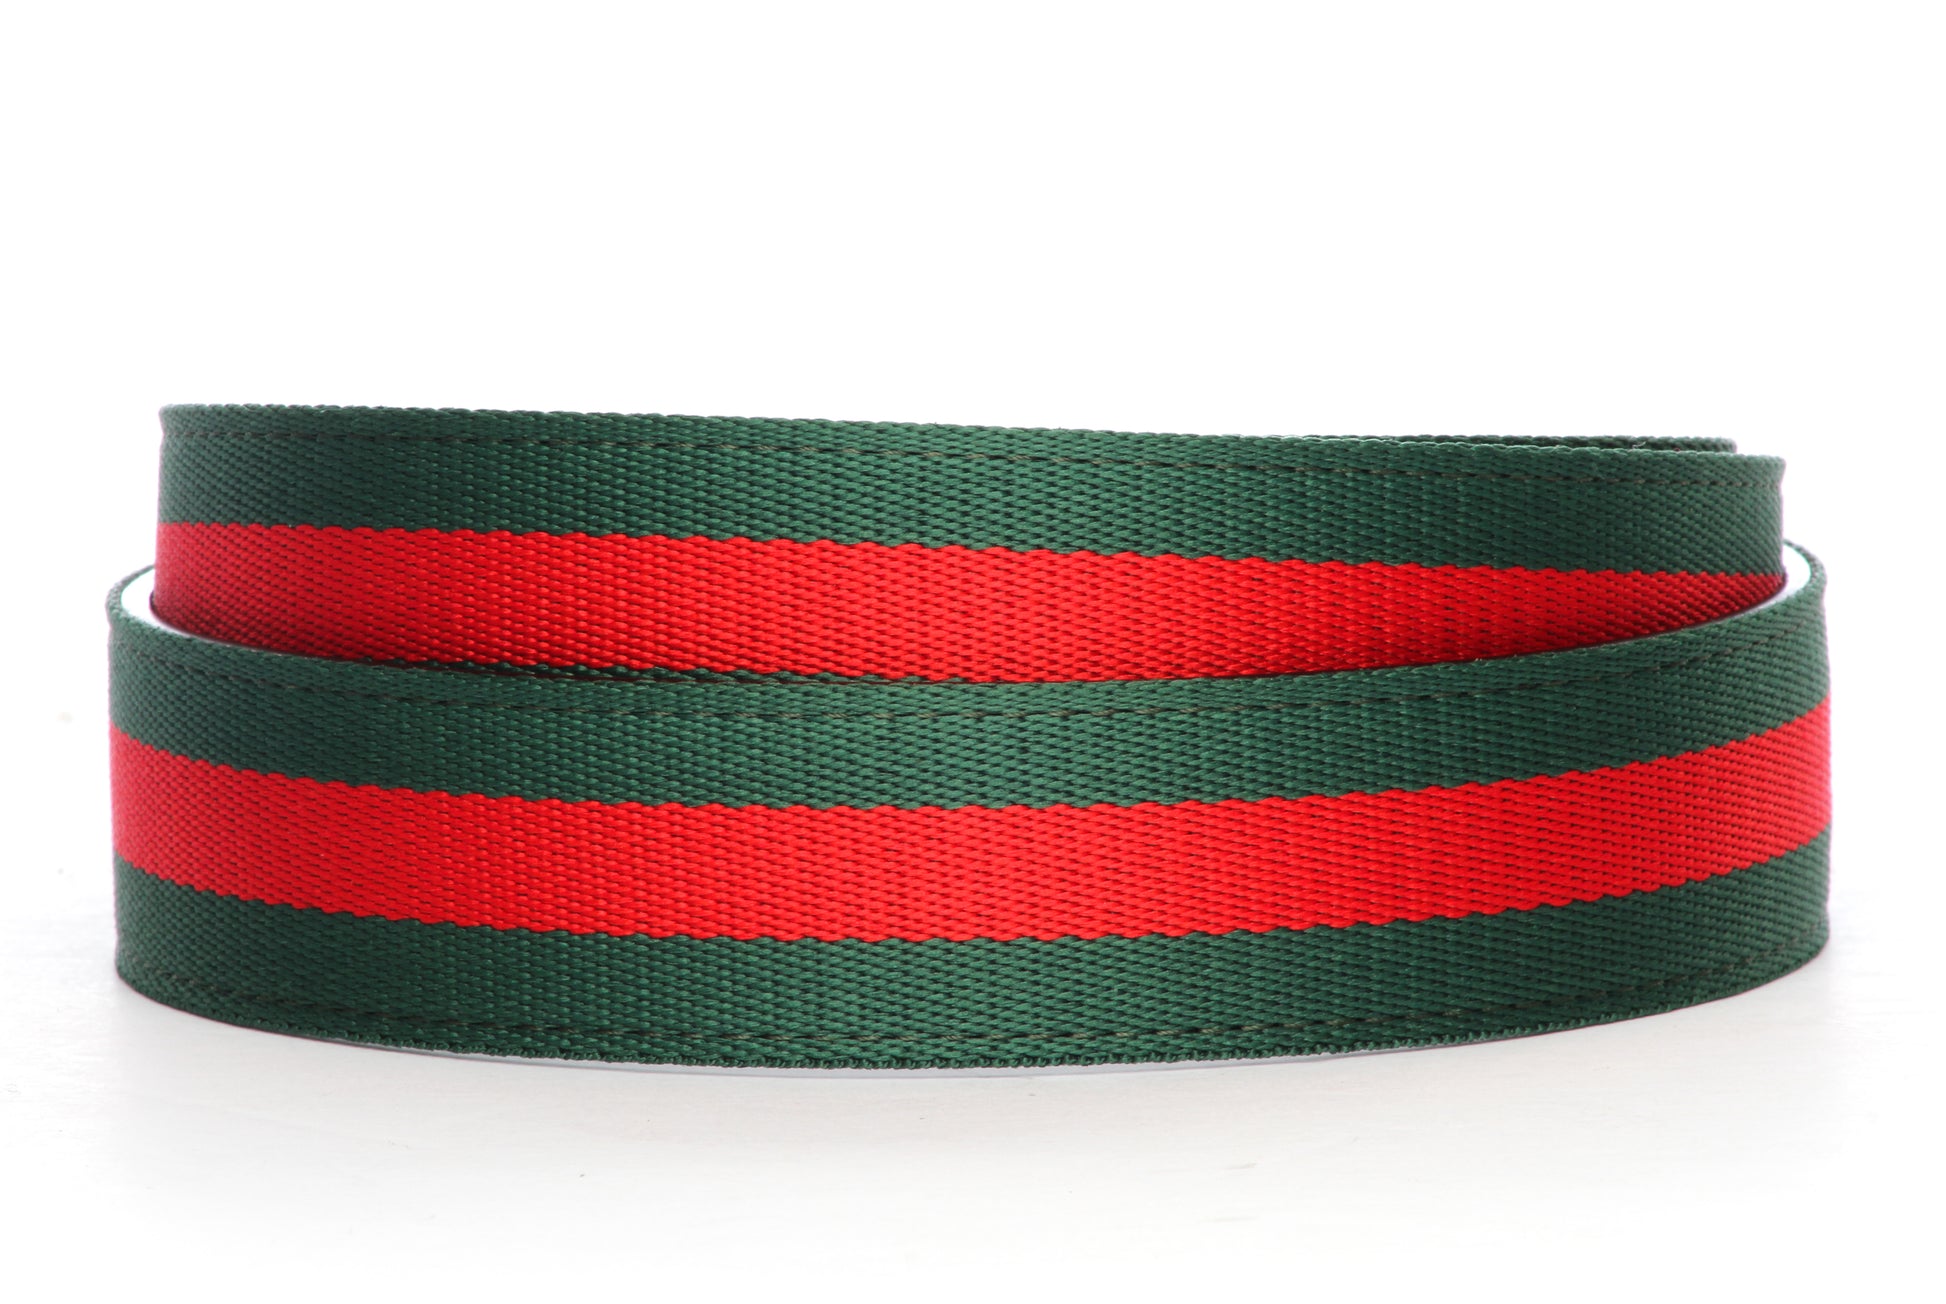 Men's cloth belt strap in green-red stripe, 1.5 inches wide, casual look